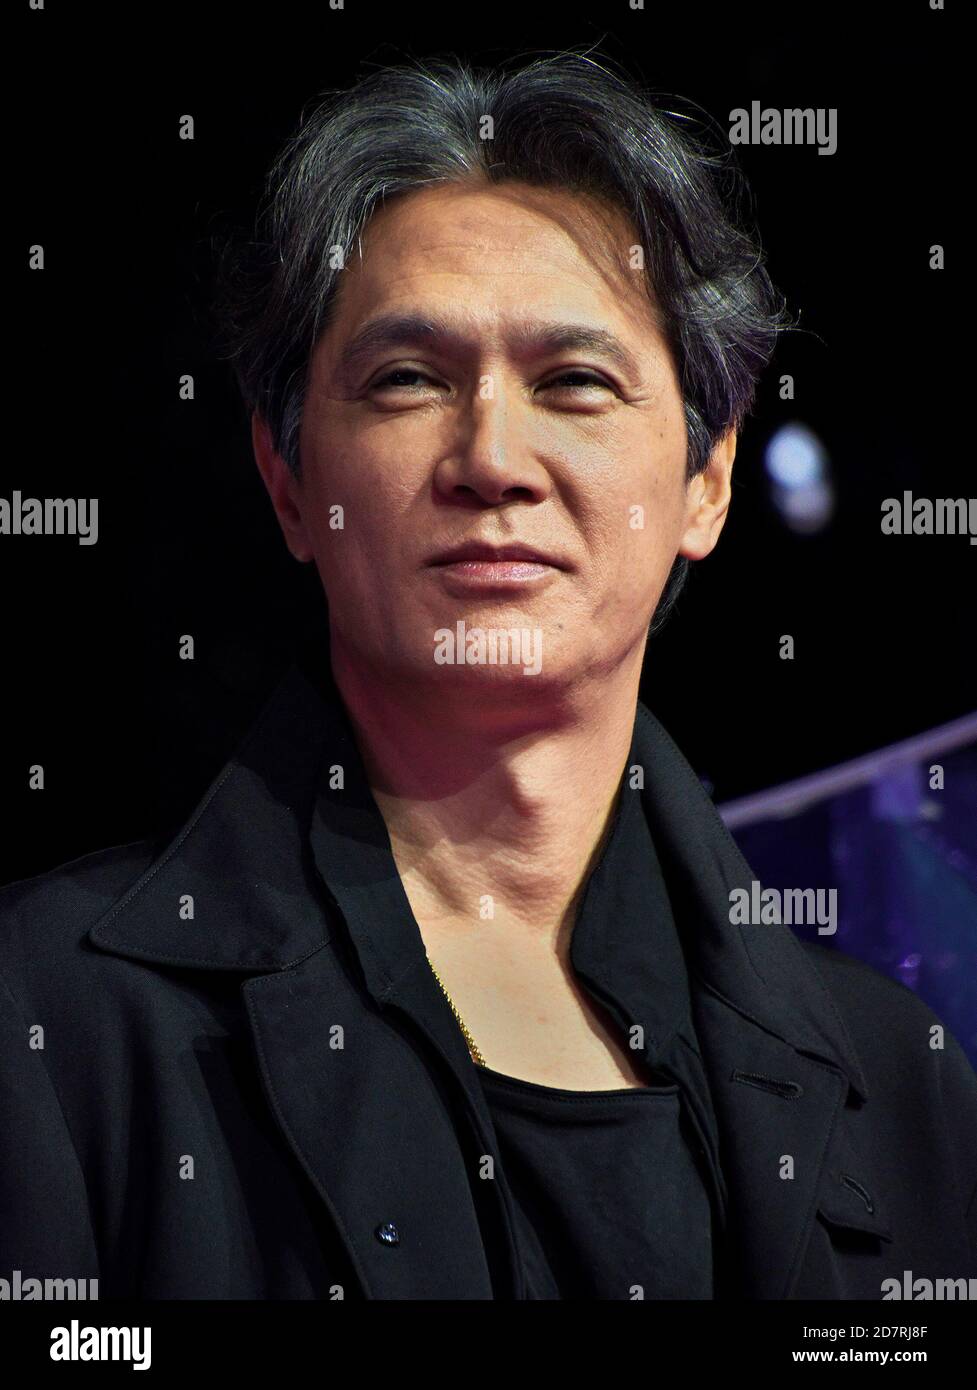 Actor Masaya Kato attends a stage greeting for "Dancing in her dreams" at strip theater Asakusa Rockza in Tokyo, Japan on October 20, 2020. Stock Photo